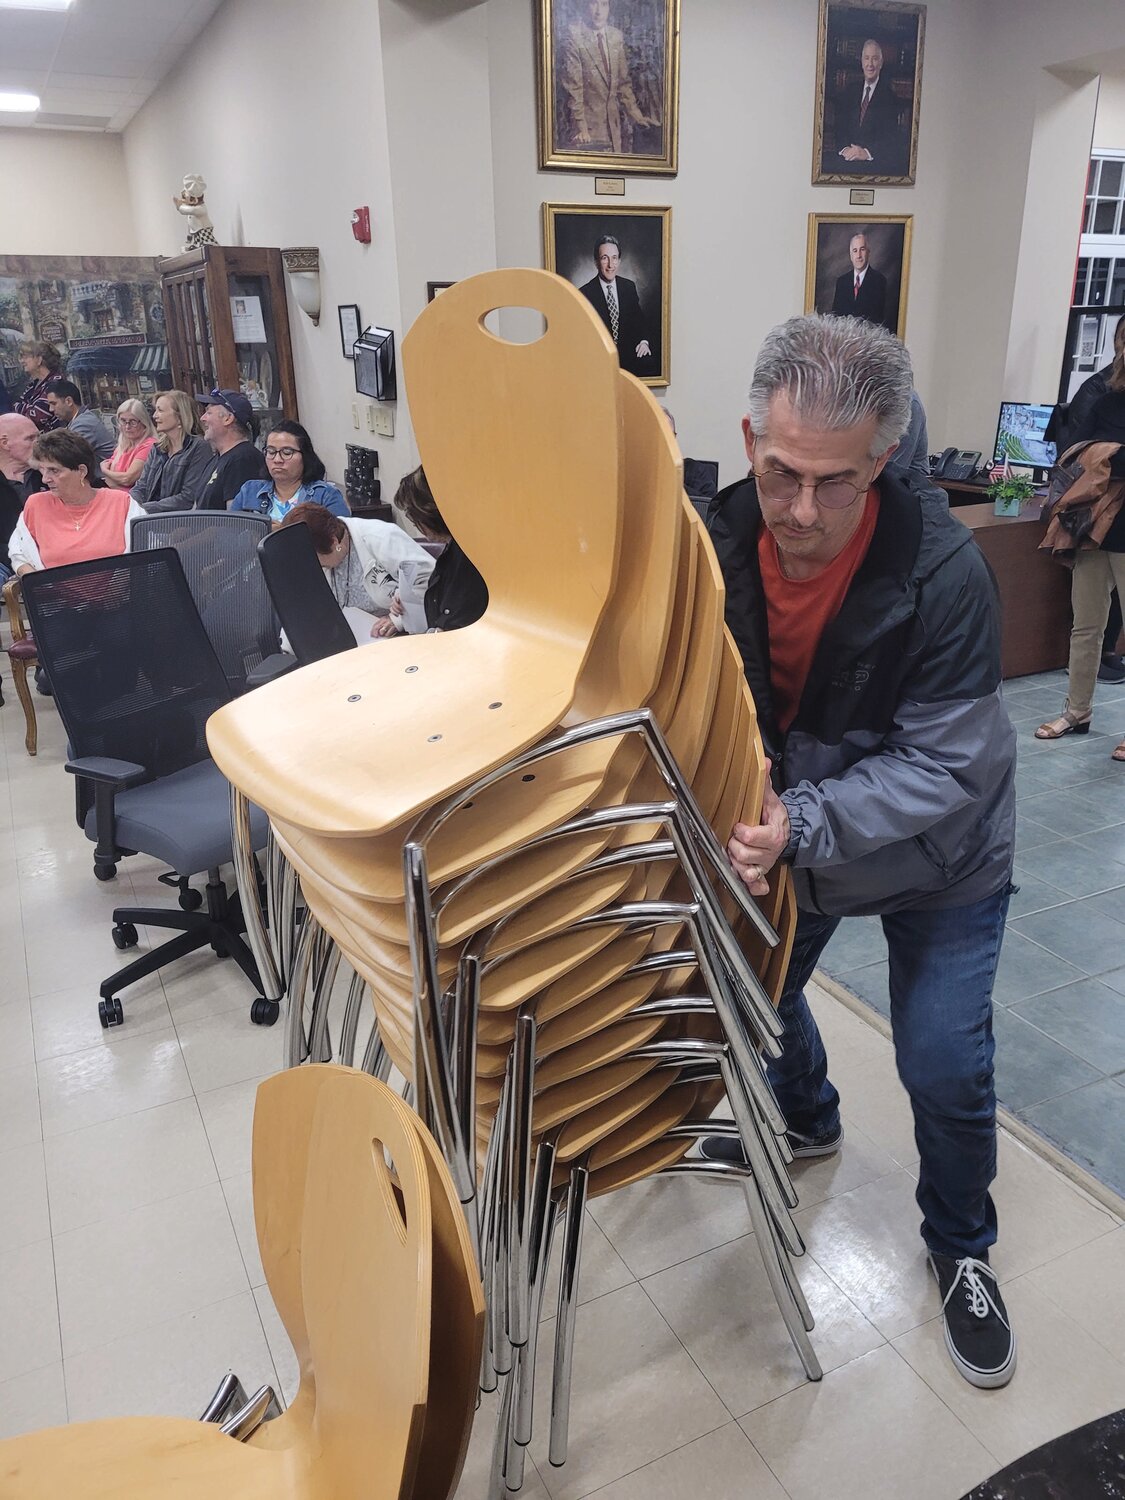 EXTRA SEATS: For a while, it was standing-room-only at the Senior Center. Extra chairs were brought in to the meeting space.